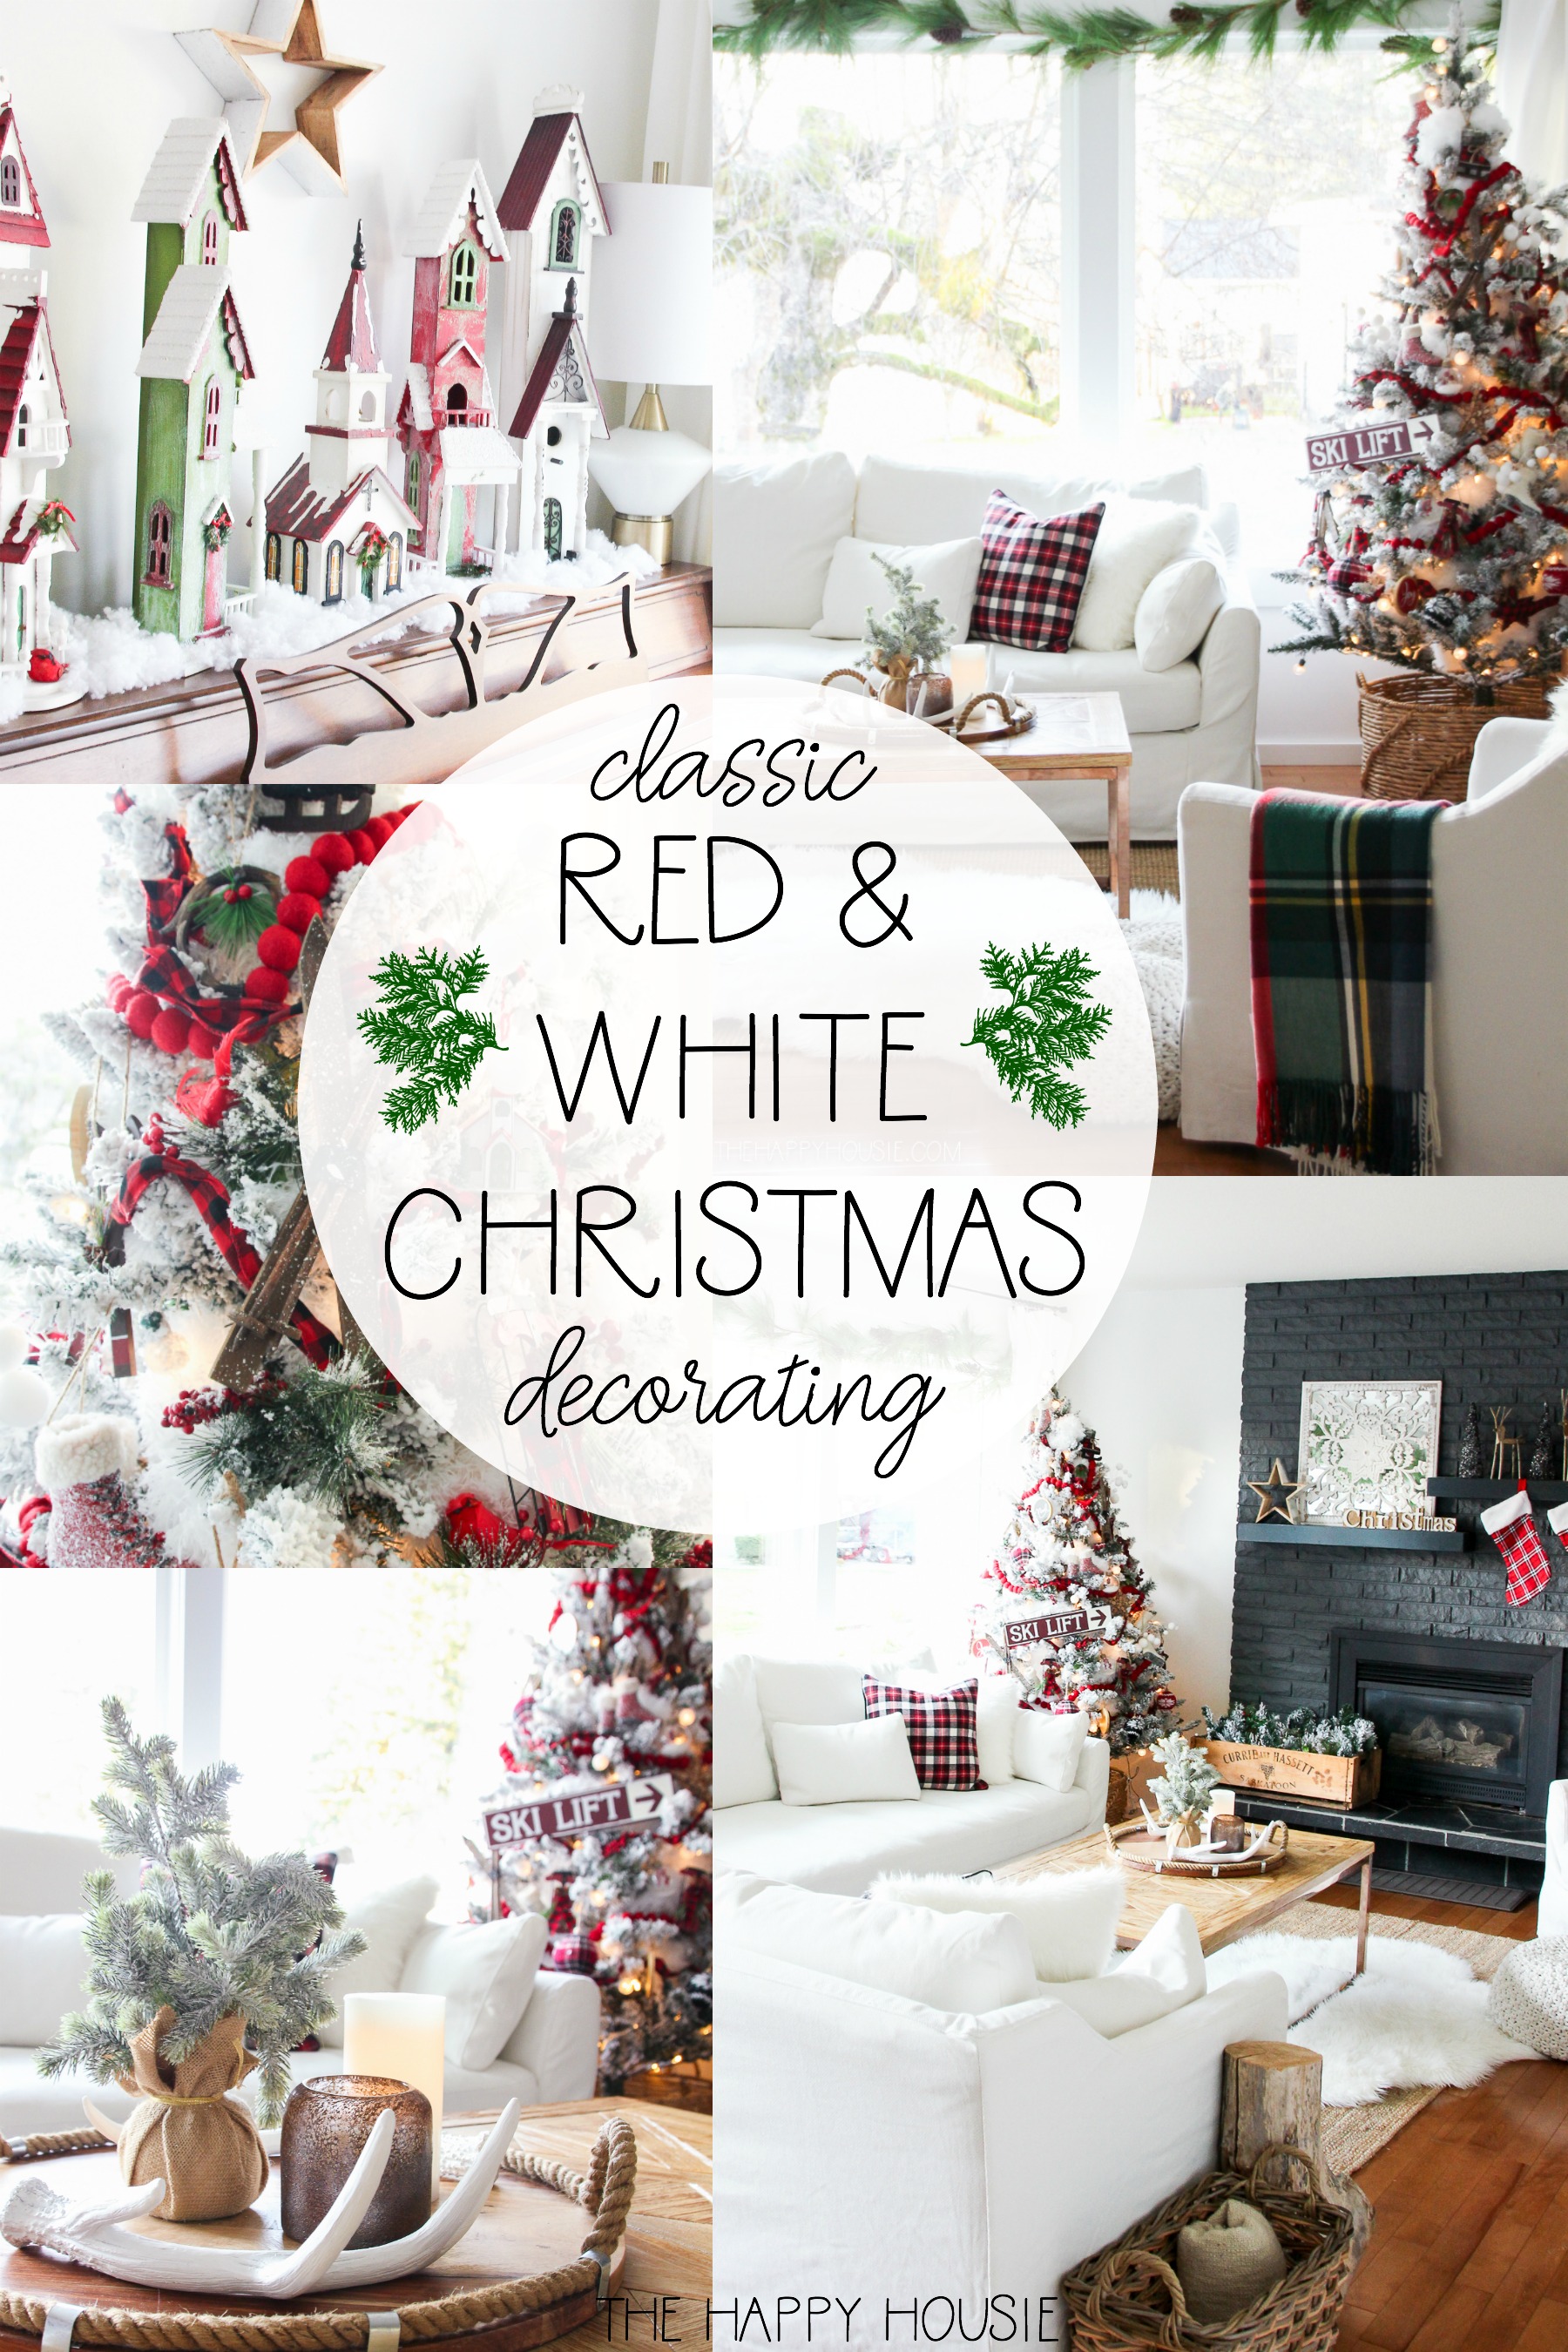 Red & White Christmas Decorating & New Living Room Tour ...